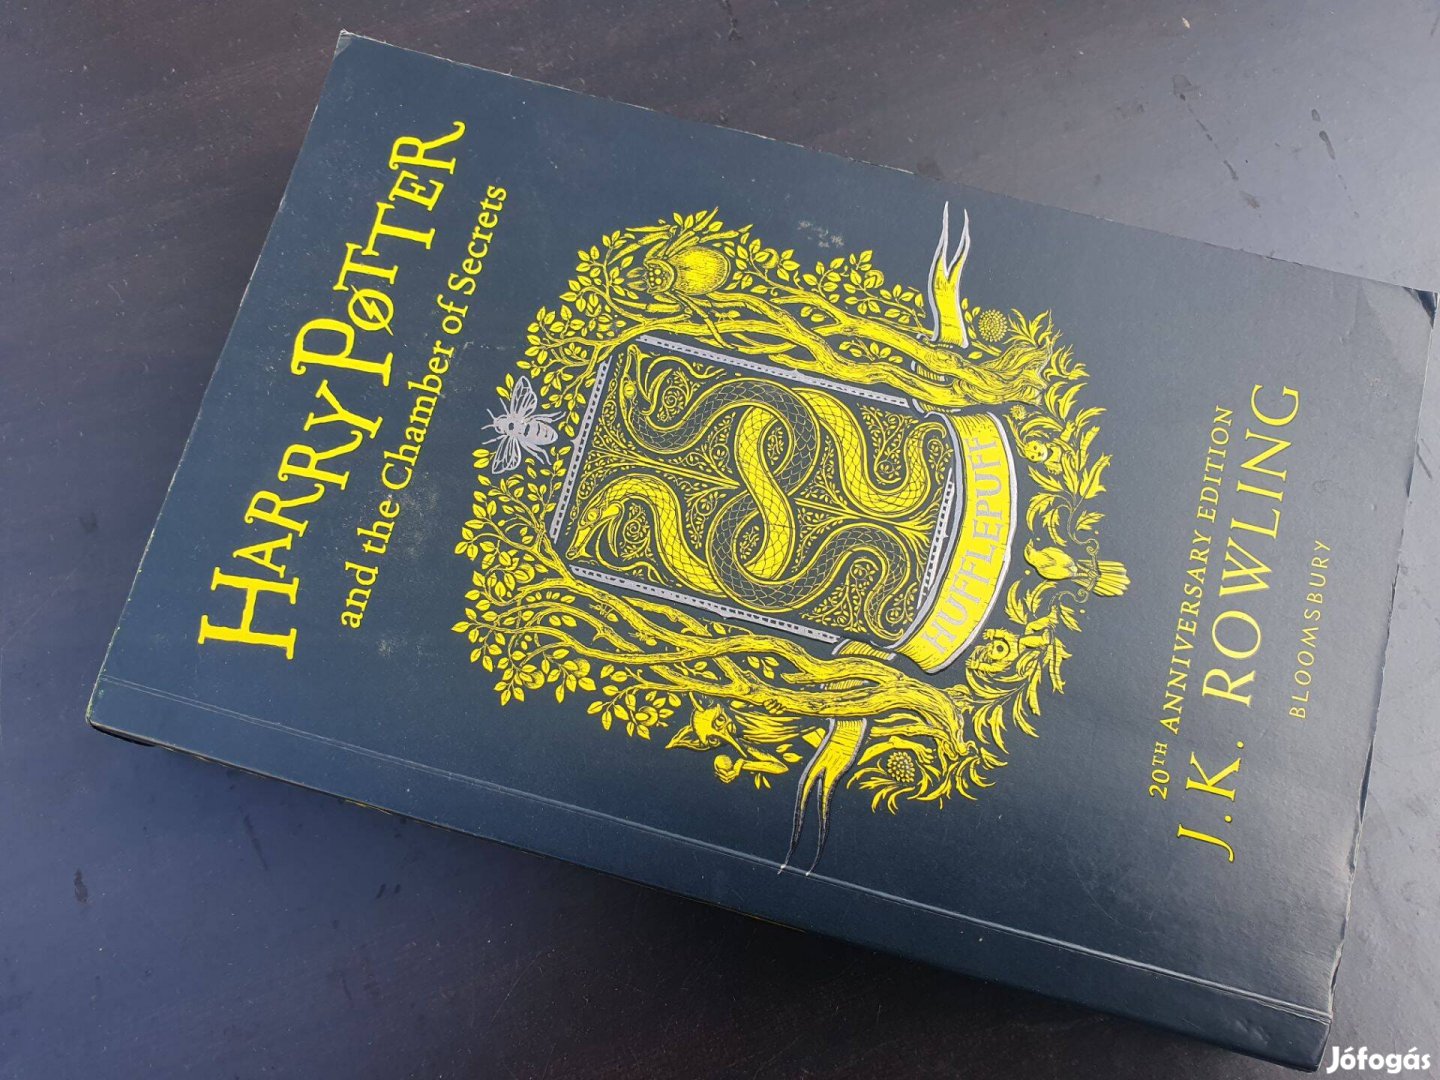 Harry Potter and the Chamber of Secrets -Hufflepuff, Slytherin edition